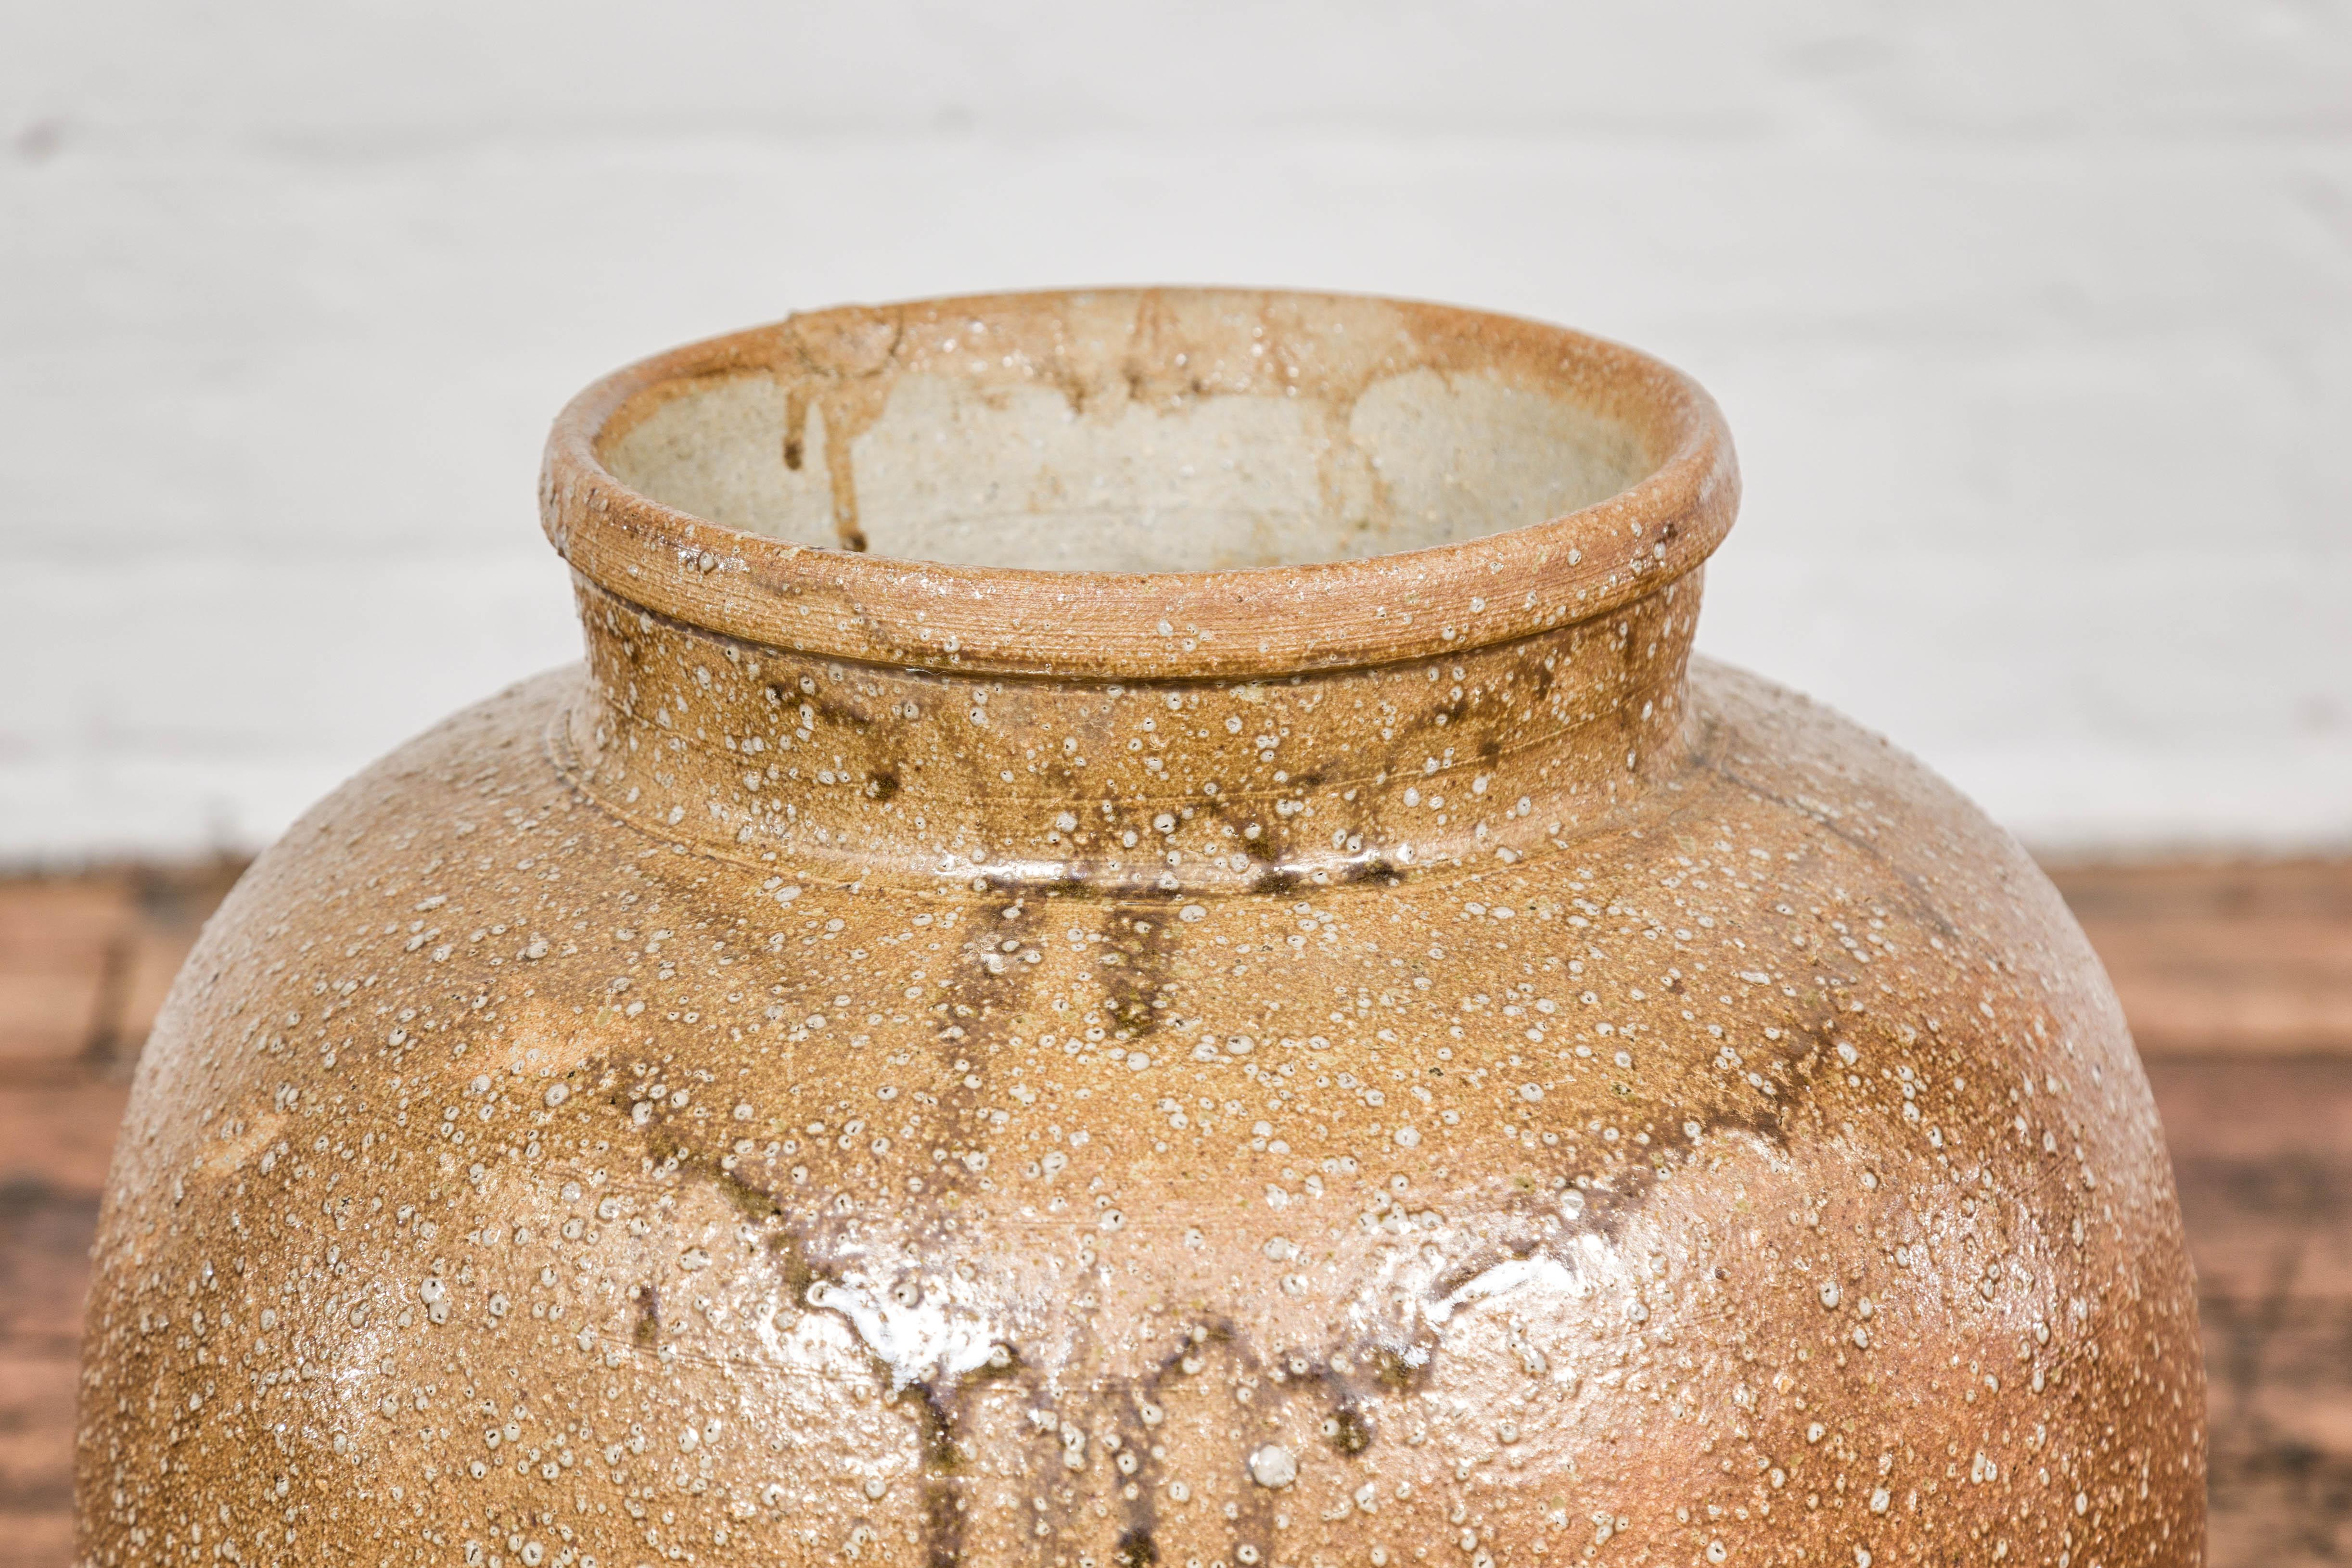 20th Century Japanese Taishō Period Sand Glaze Vase with Dripping Finish, circa 1900 For Sale